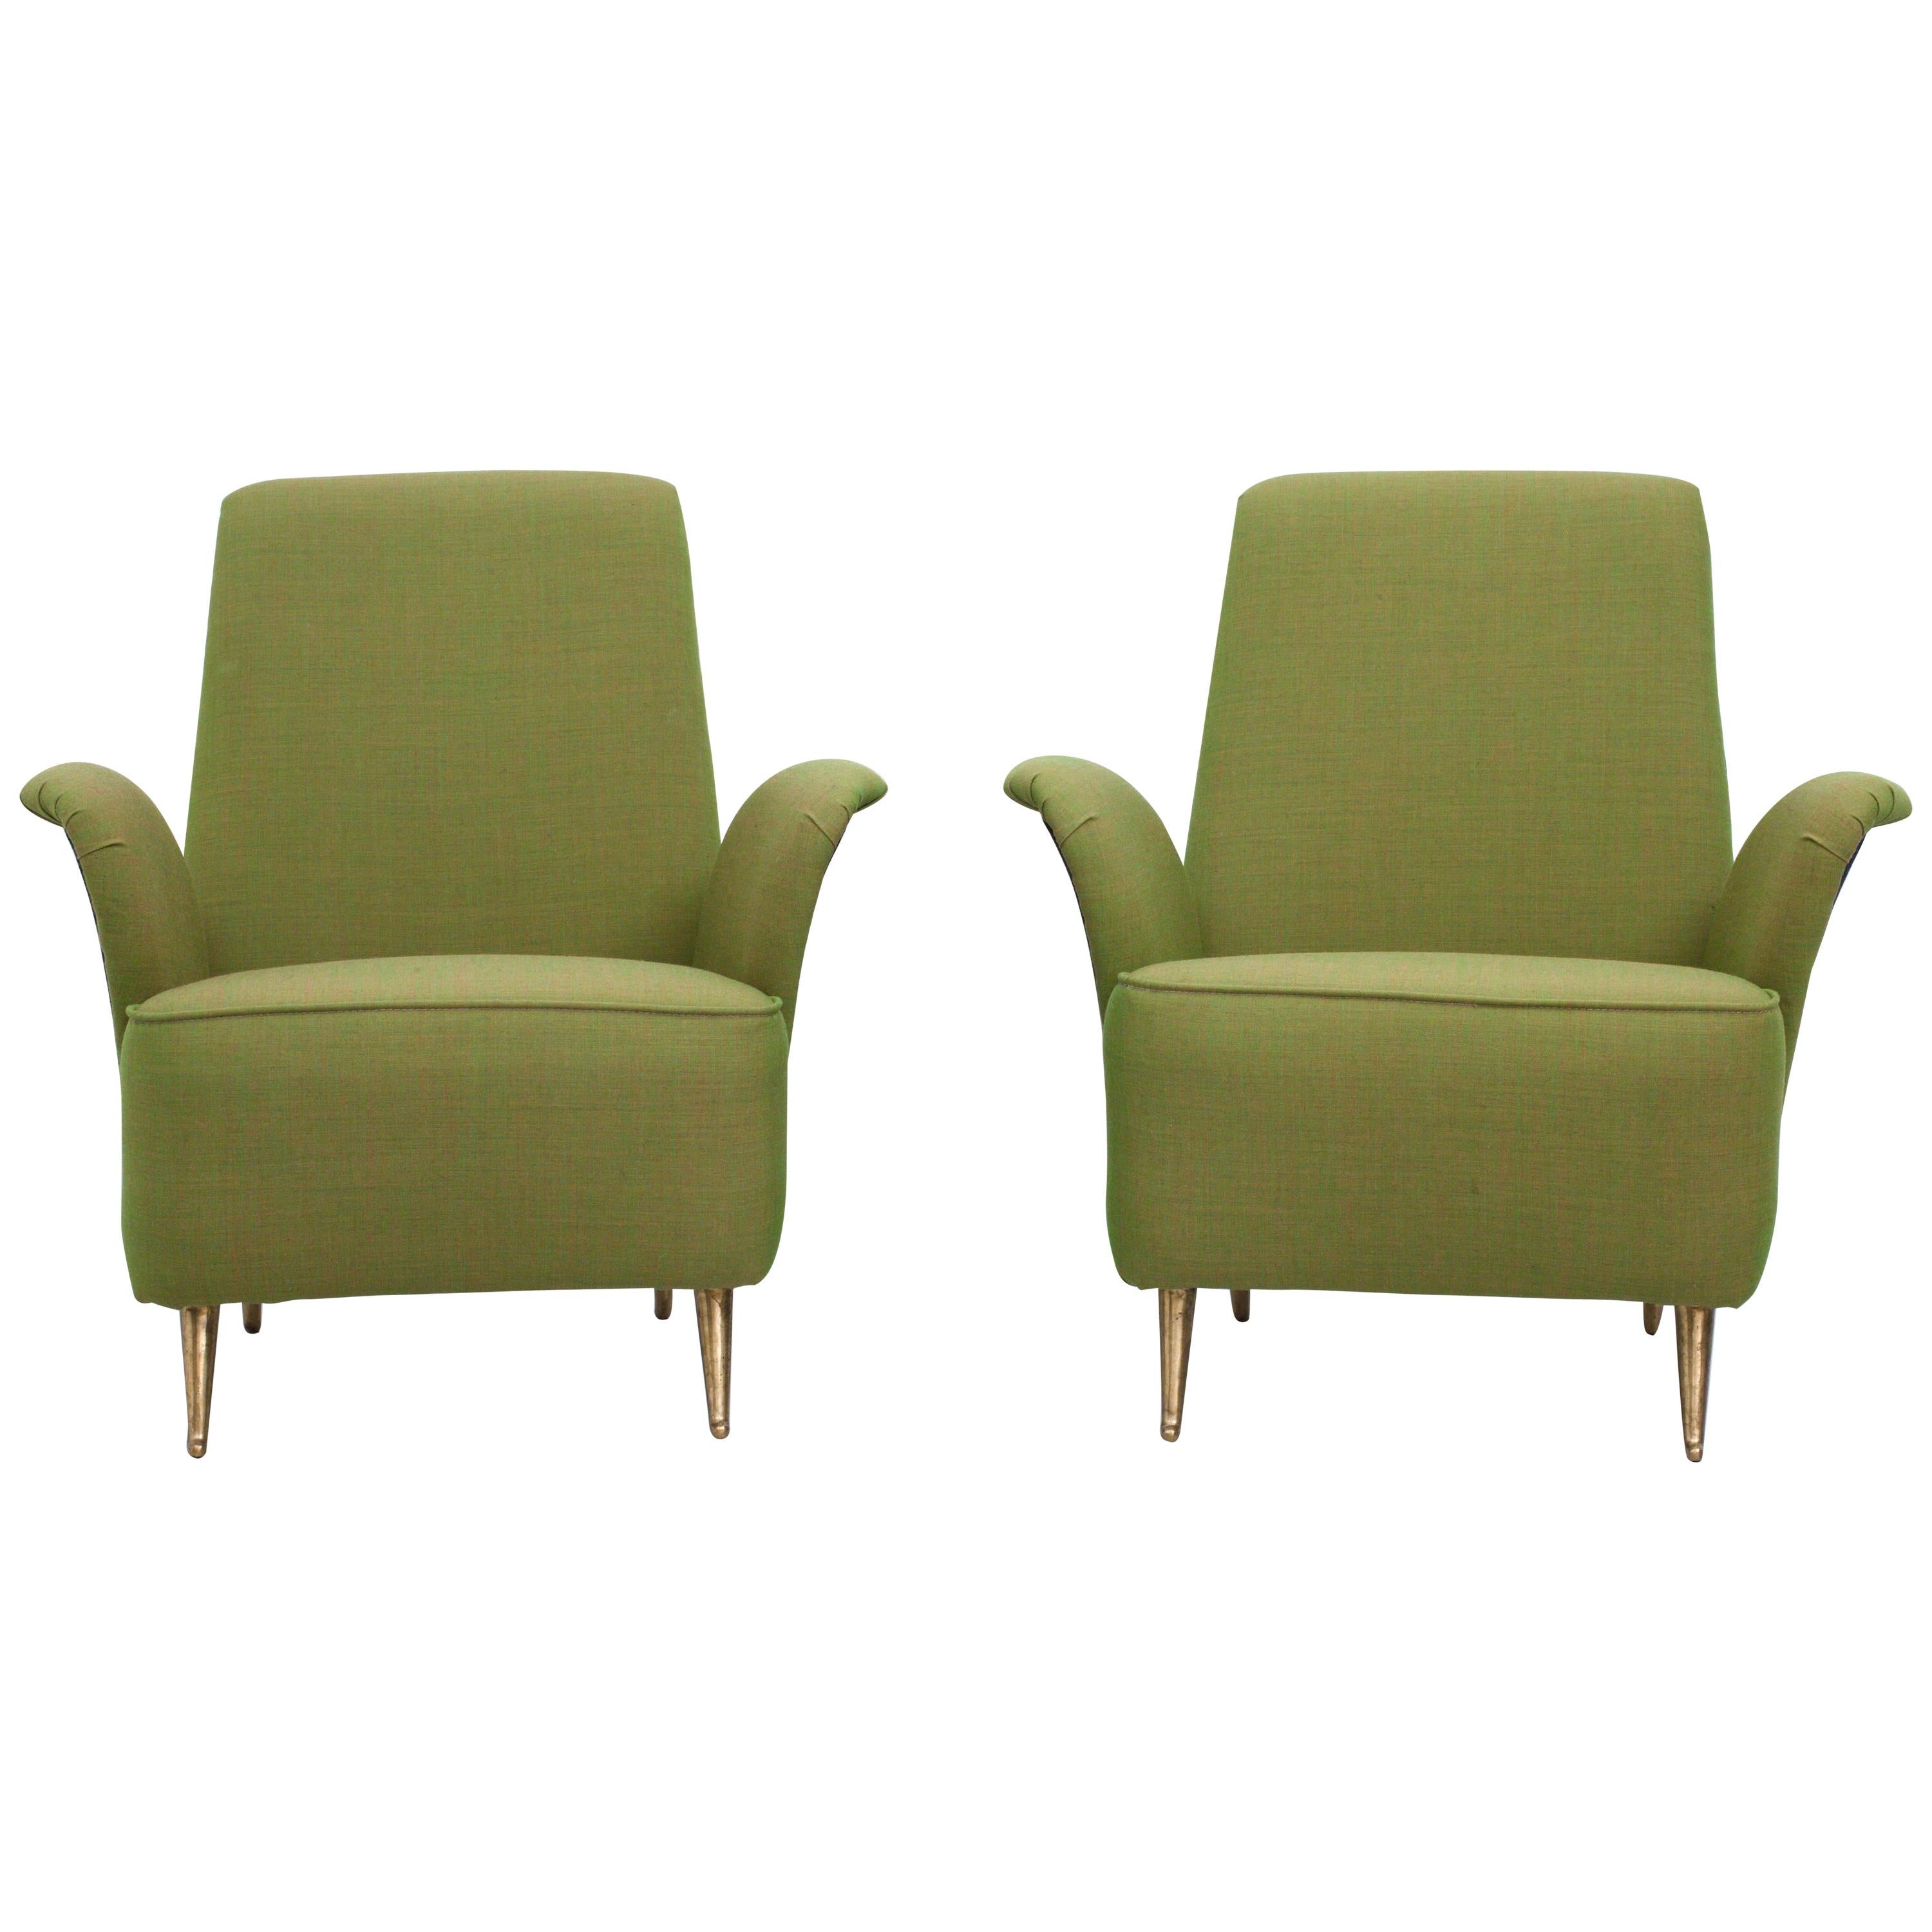 Set of Two Lounge Chairs in Fabric and Brass by i.S.a., Italy, 1960s For Sale